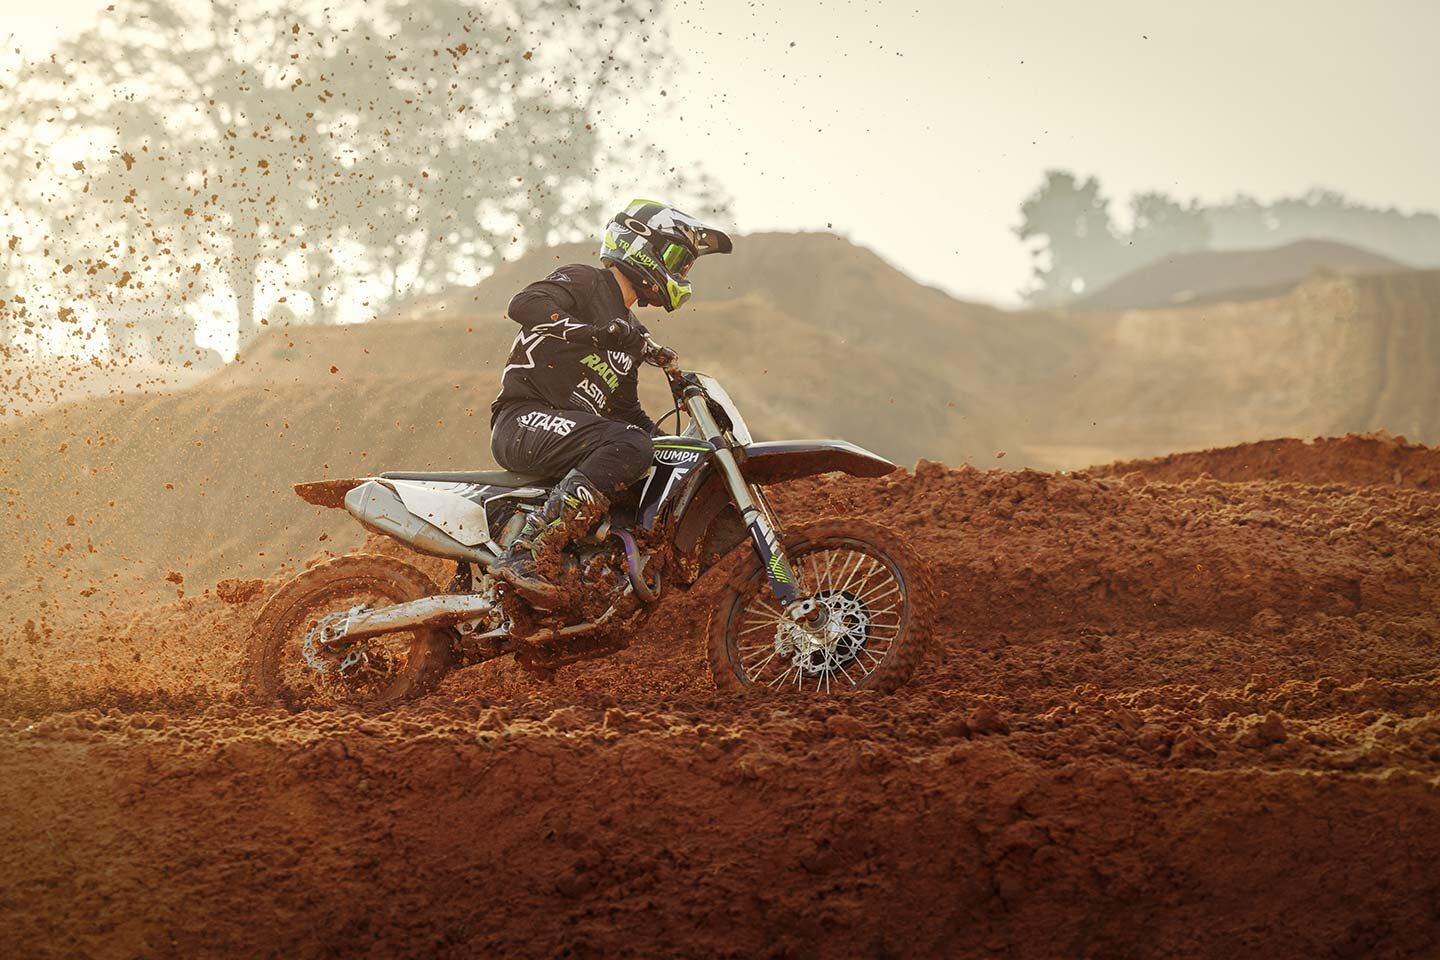 Triumph declares that the TF 250-X represents a step forward in terms of power-to-weight ratio.